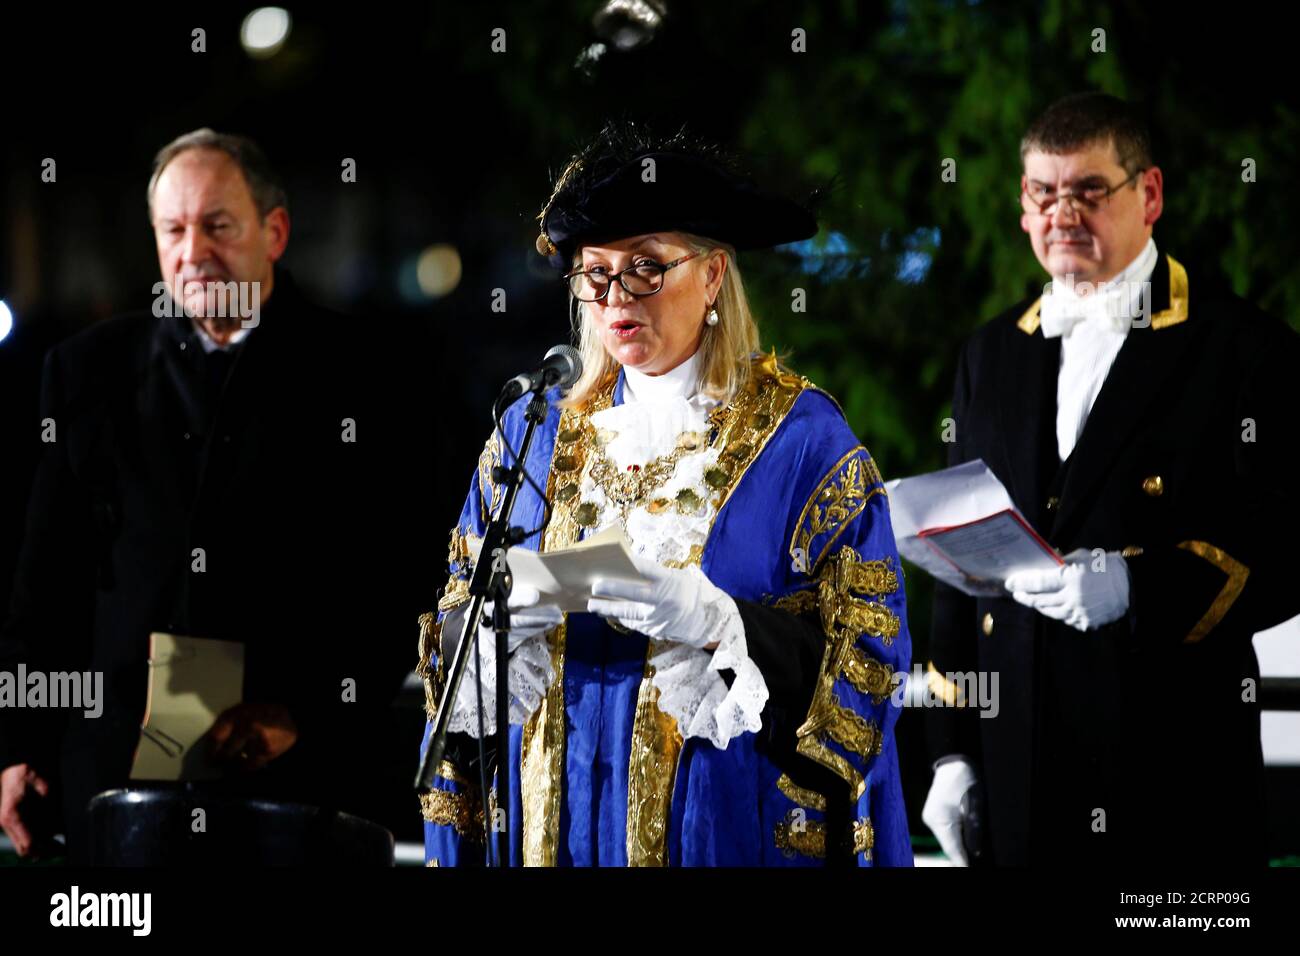 The Lord Mayor of Westminster Lindsey Hall speaks during the Trafalgar Square Christmas tree lighting ceremony in London, Britain, December 6, 2018. REUTERS/Henry Nicholls Stock Photo